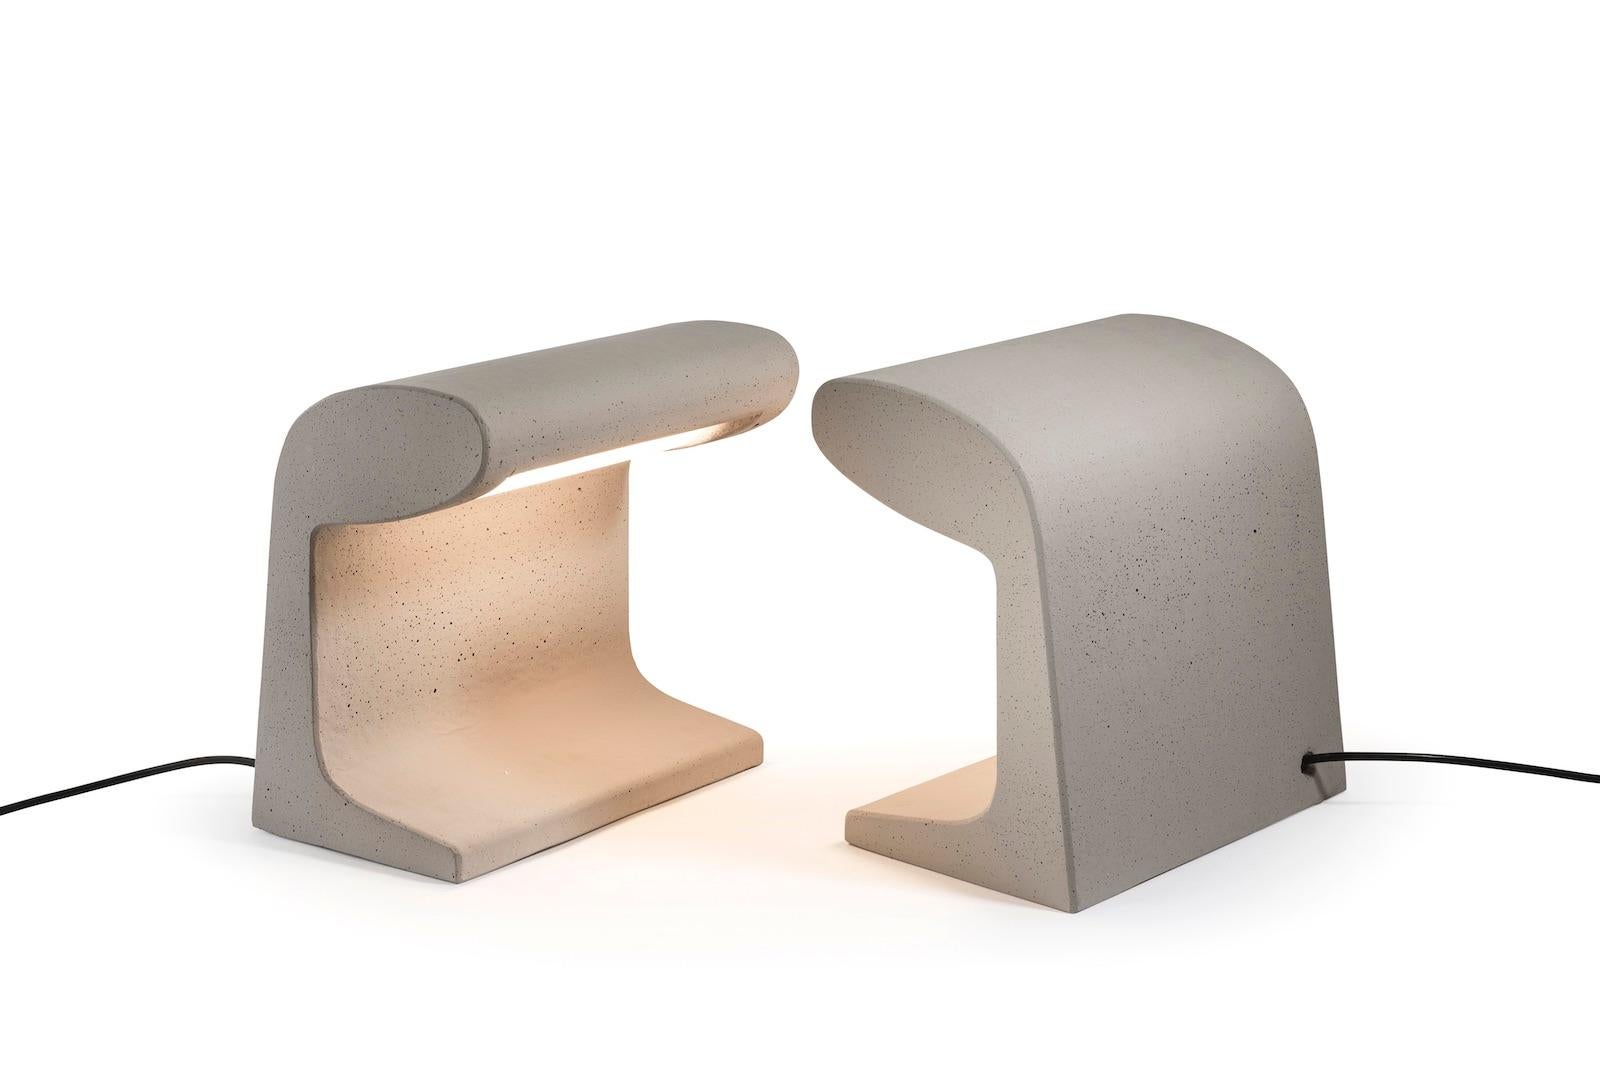 Borne Bétone Petite table lamp by Le Corbusier. Current production manufactured in France by Nemo Lighting. Concrete outdoor and indoor floor and table lamp, conceived for the Unité d’habitation de Marseille and for Bhakra Dam, Sukhna Dam in India